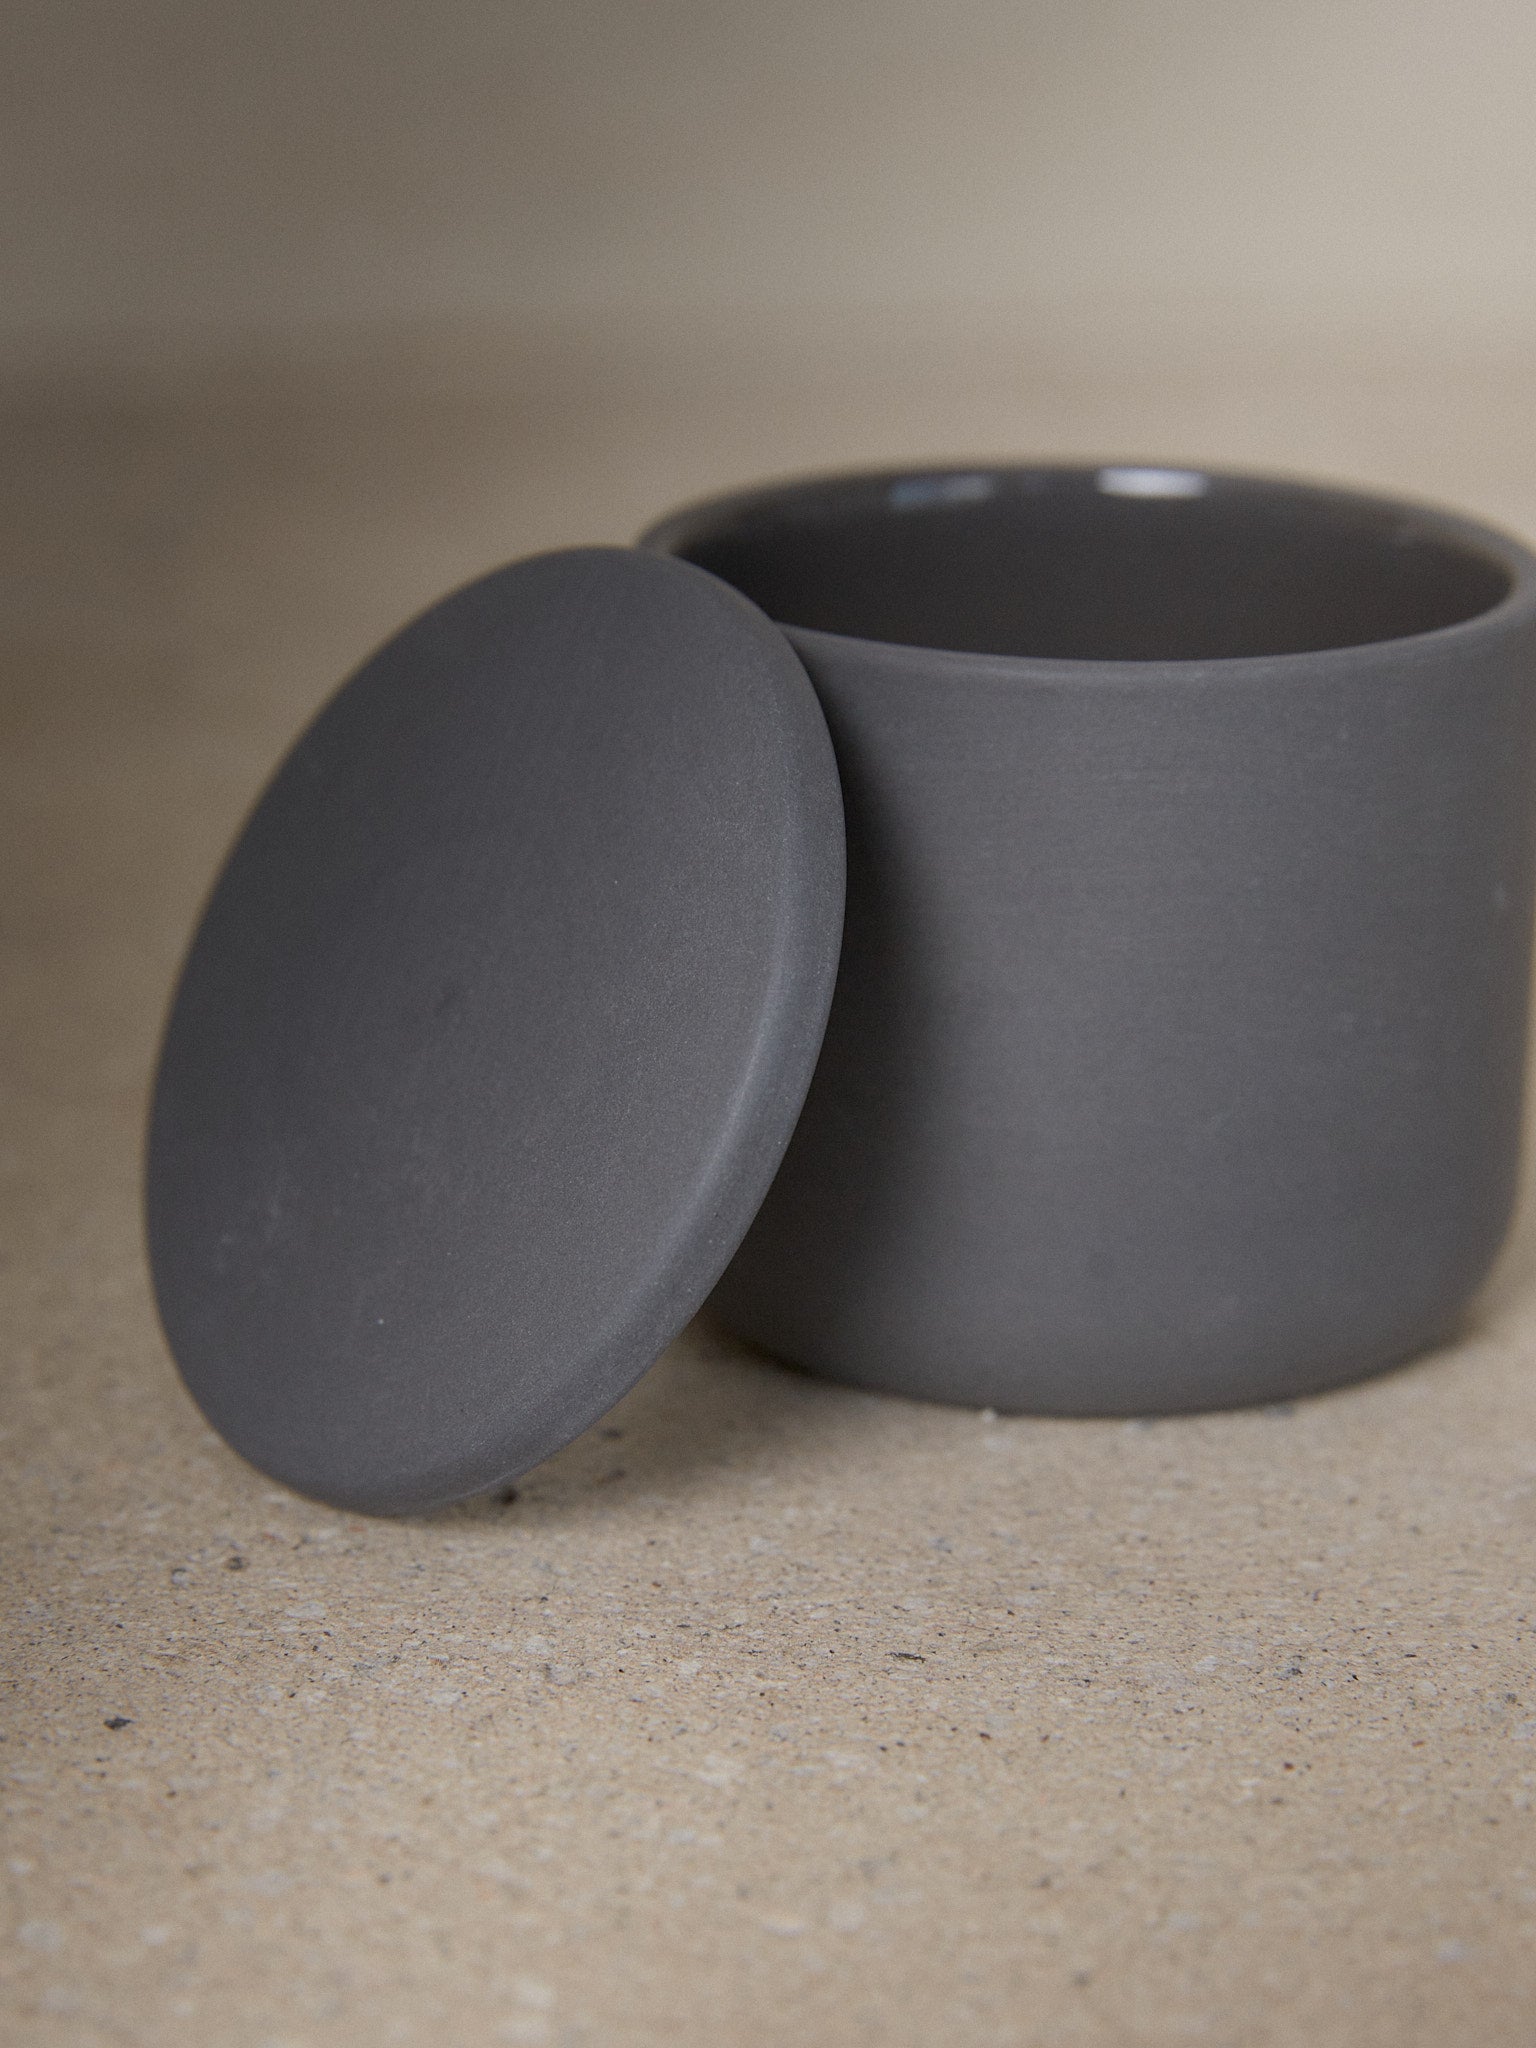 Dark Grey Round Cose Box. A study in refined simplicity, the Round Cose Box by Bertrand Lejoly for Serax adds subtle luxury to any bathroom or kitchen.